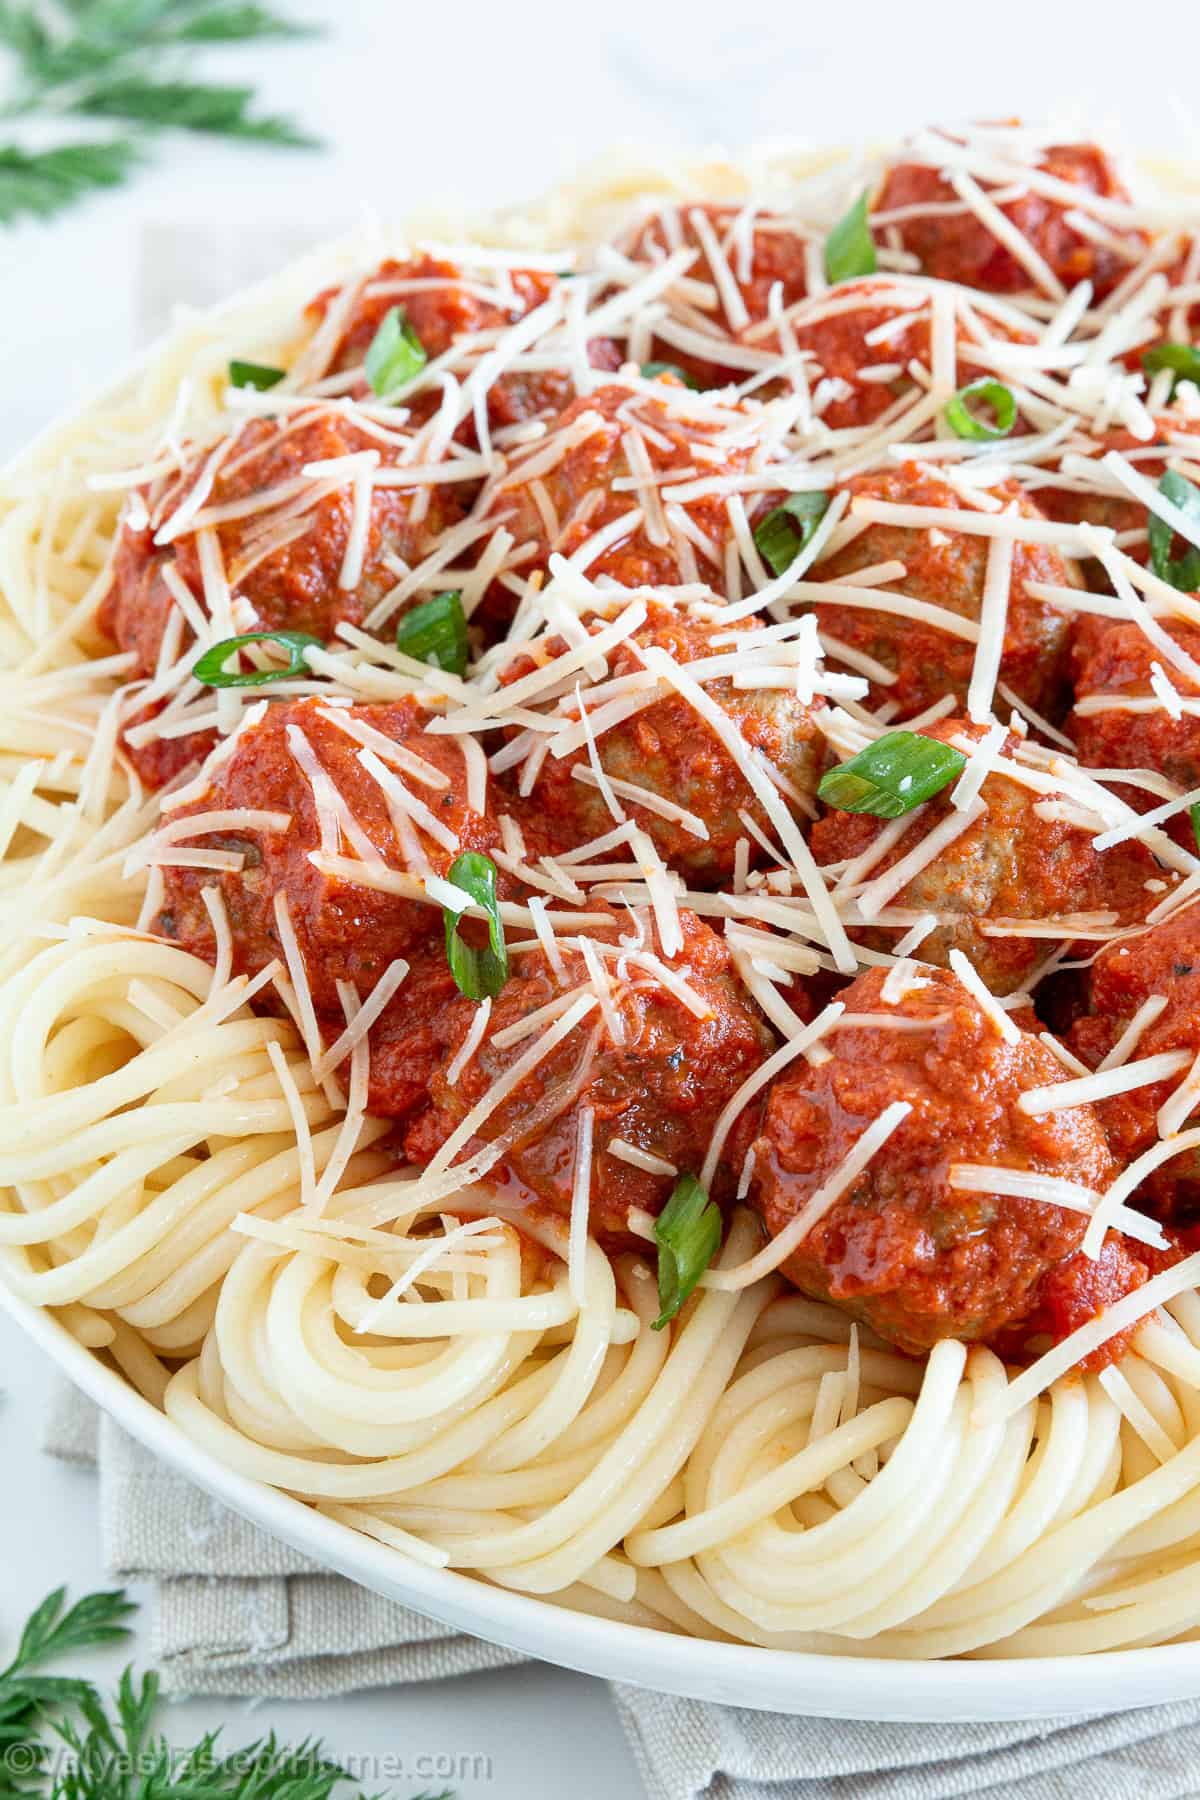 By using hand-picked ingredients and sauces, this recipe features spaghetti and meatballs that are high in protein and flavor, but low in sodium and calories compared to other recipes.